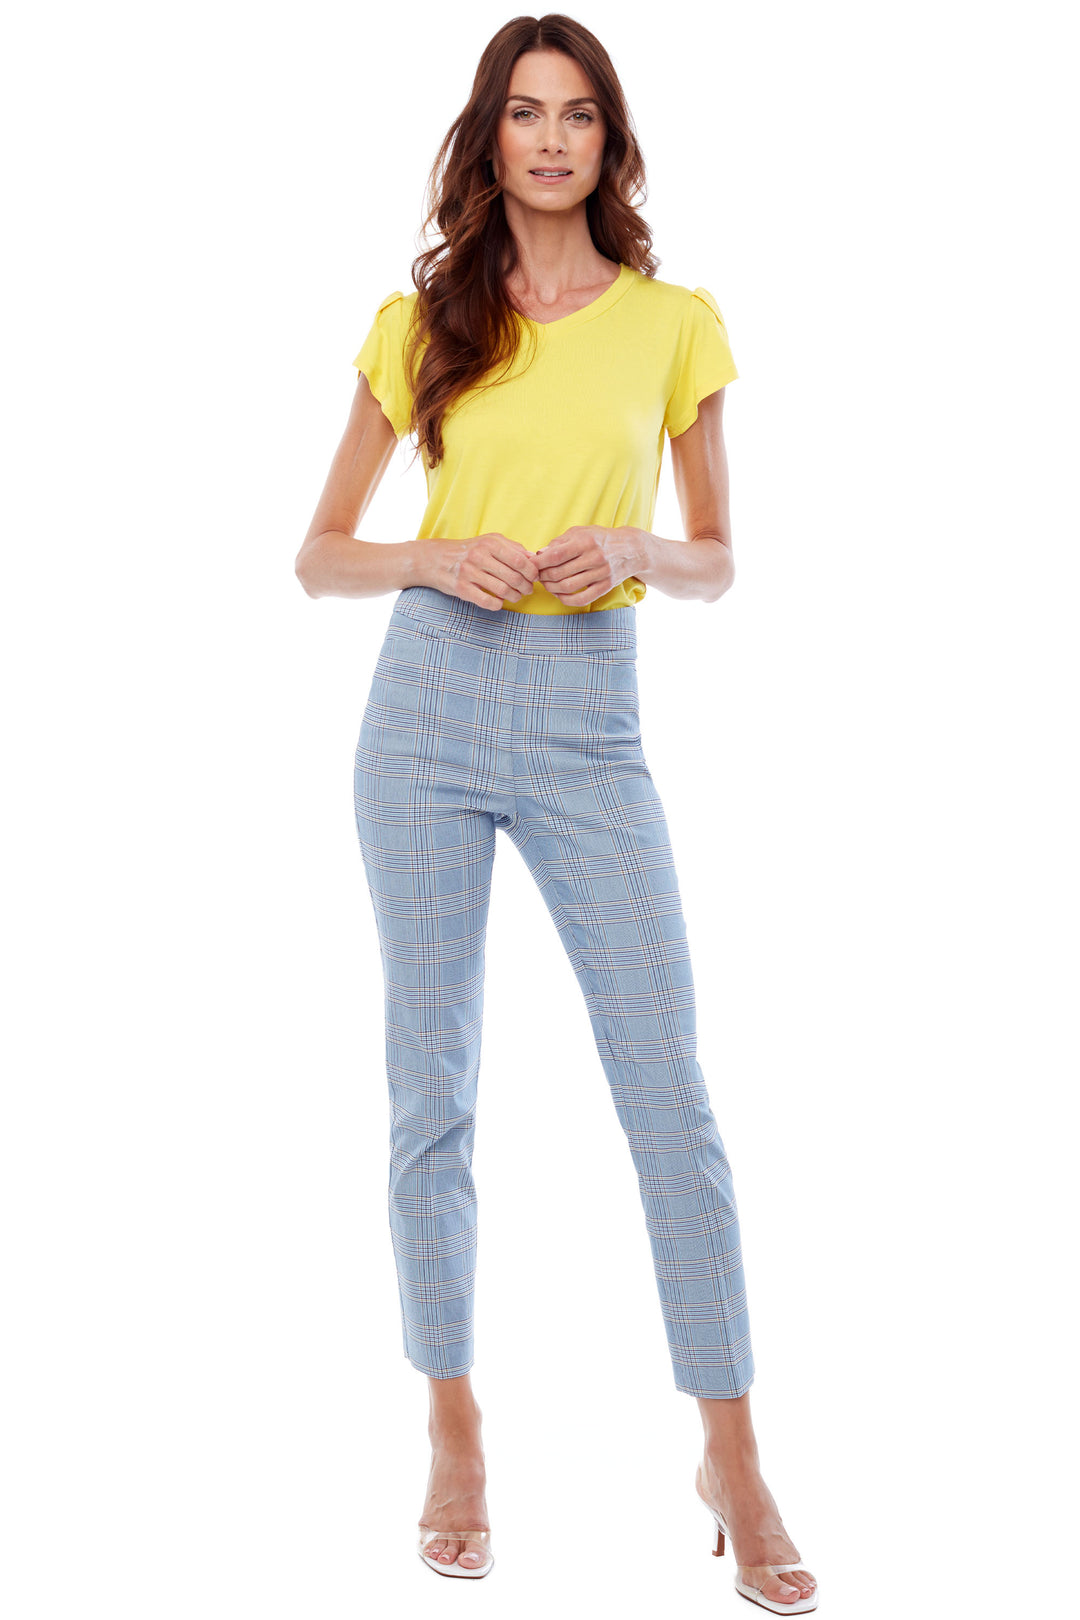 Up Pants Spring 2023 women's business casual ankle length blue printed pants - front